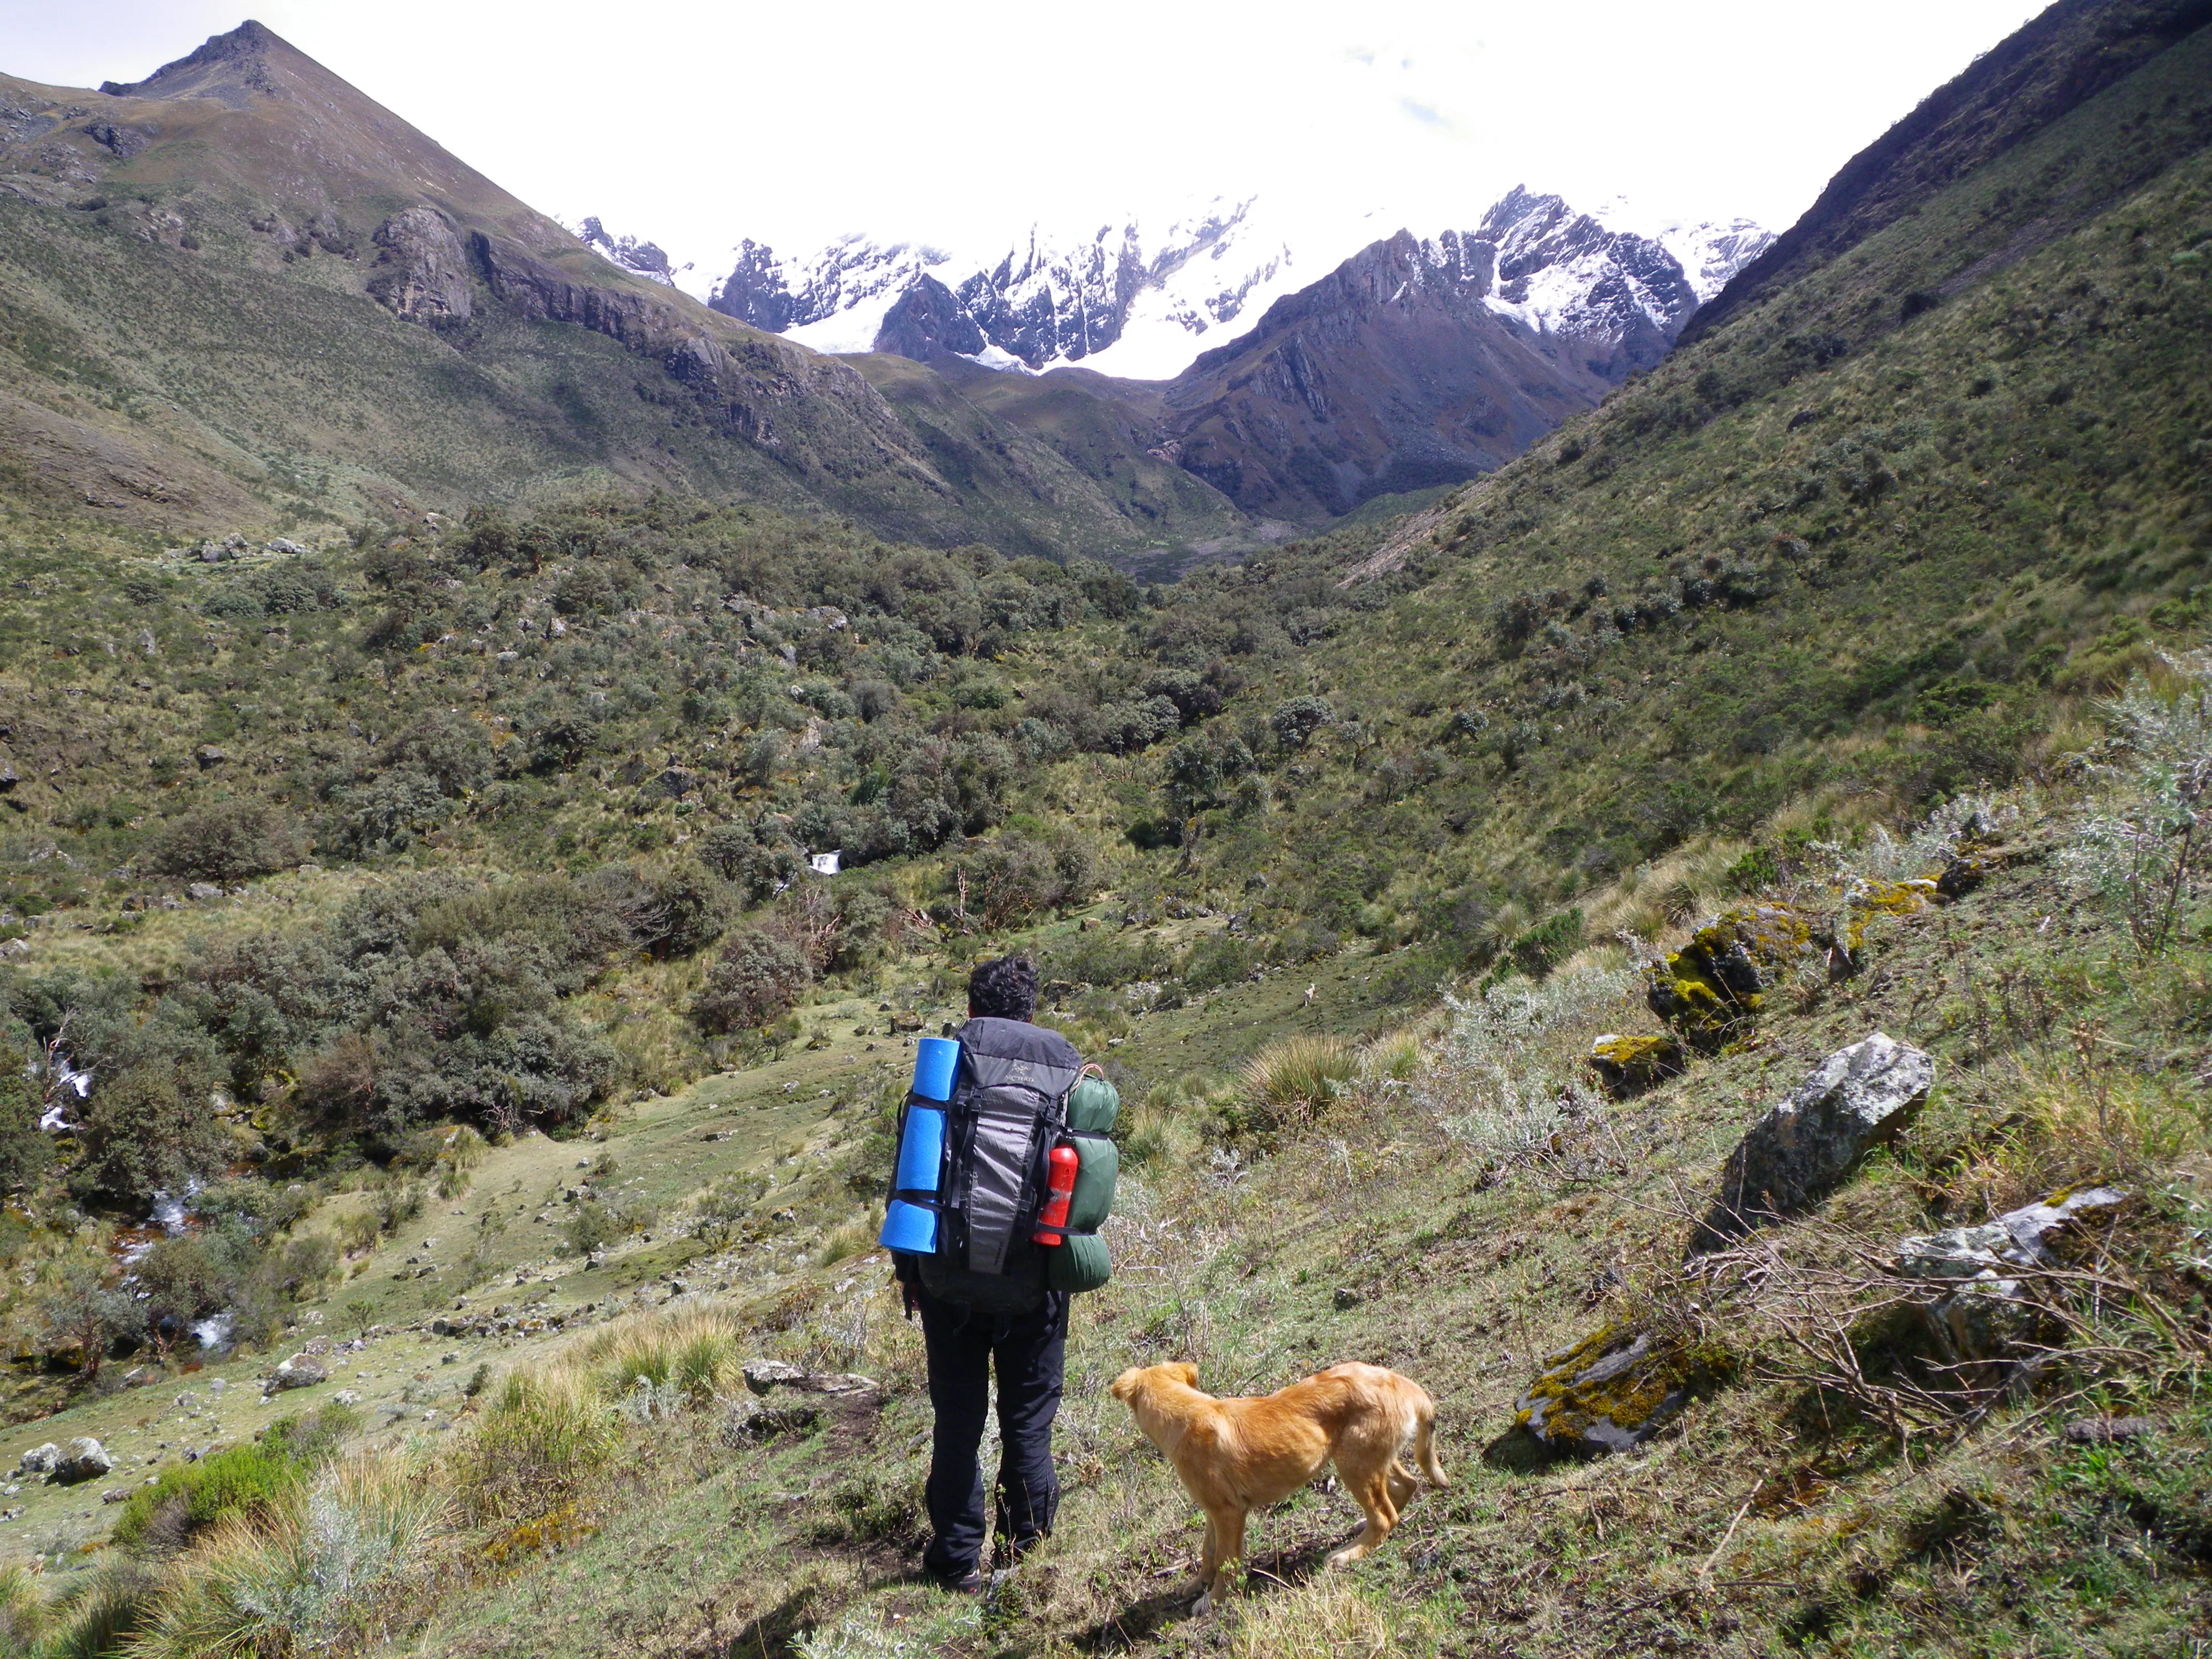 Quilcayhuanca & Cojup Valleys in Peru, South America | Trekking & Hiking - Rated 0.8